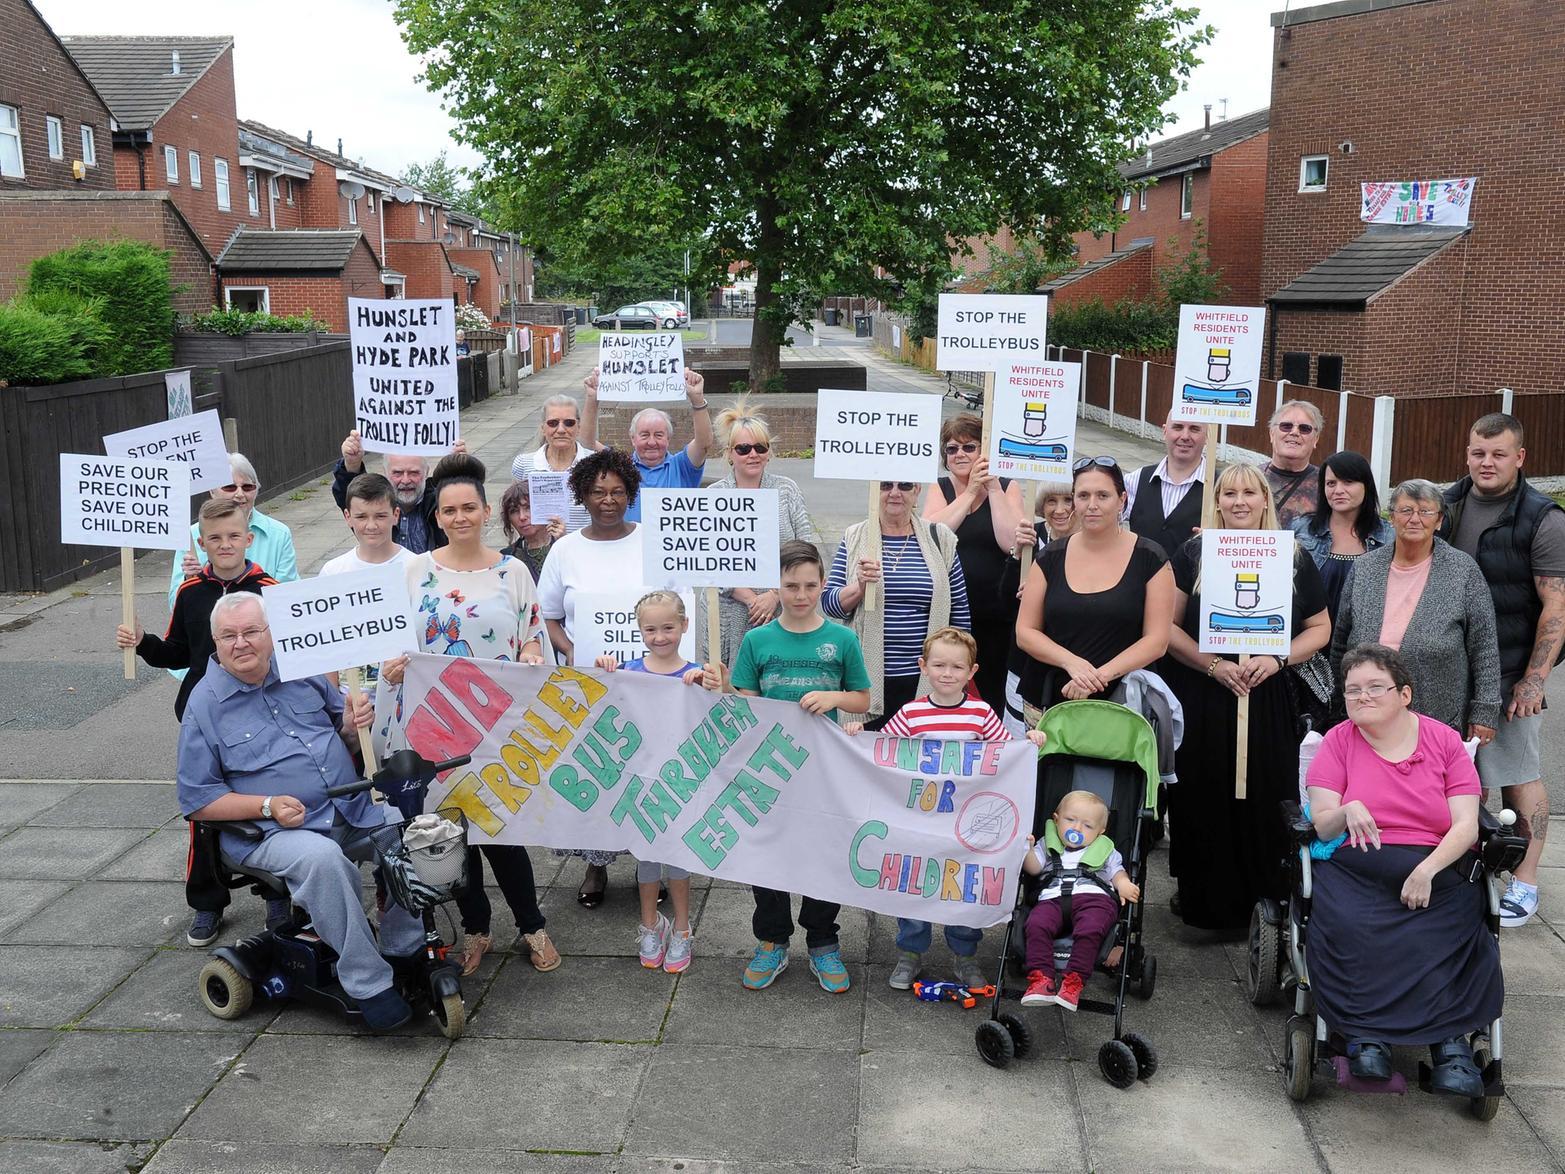 These Hunslet residents protested after it was revealed the scheme would roll straight through its pedestrianised precinct.